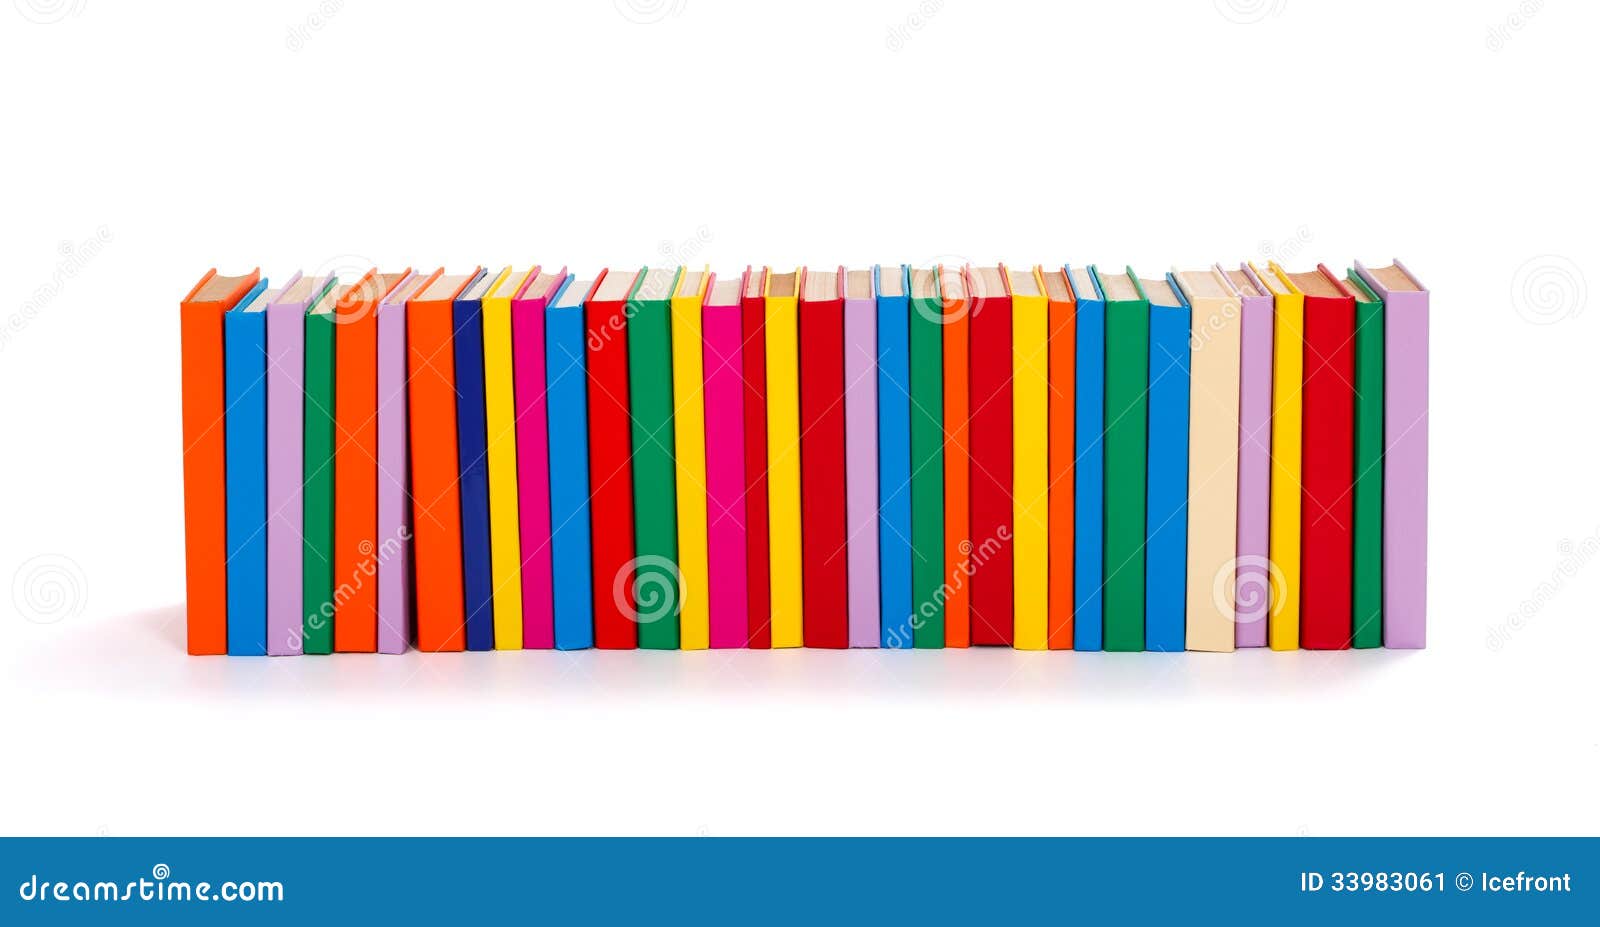 colorful books in a row